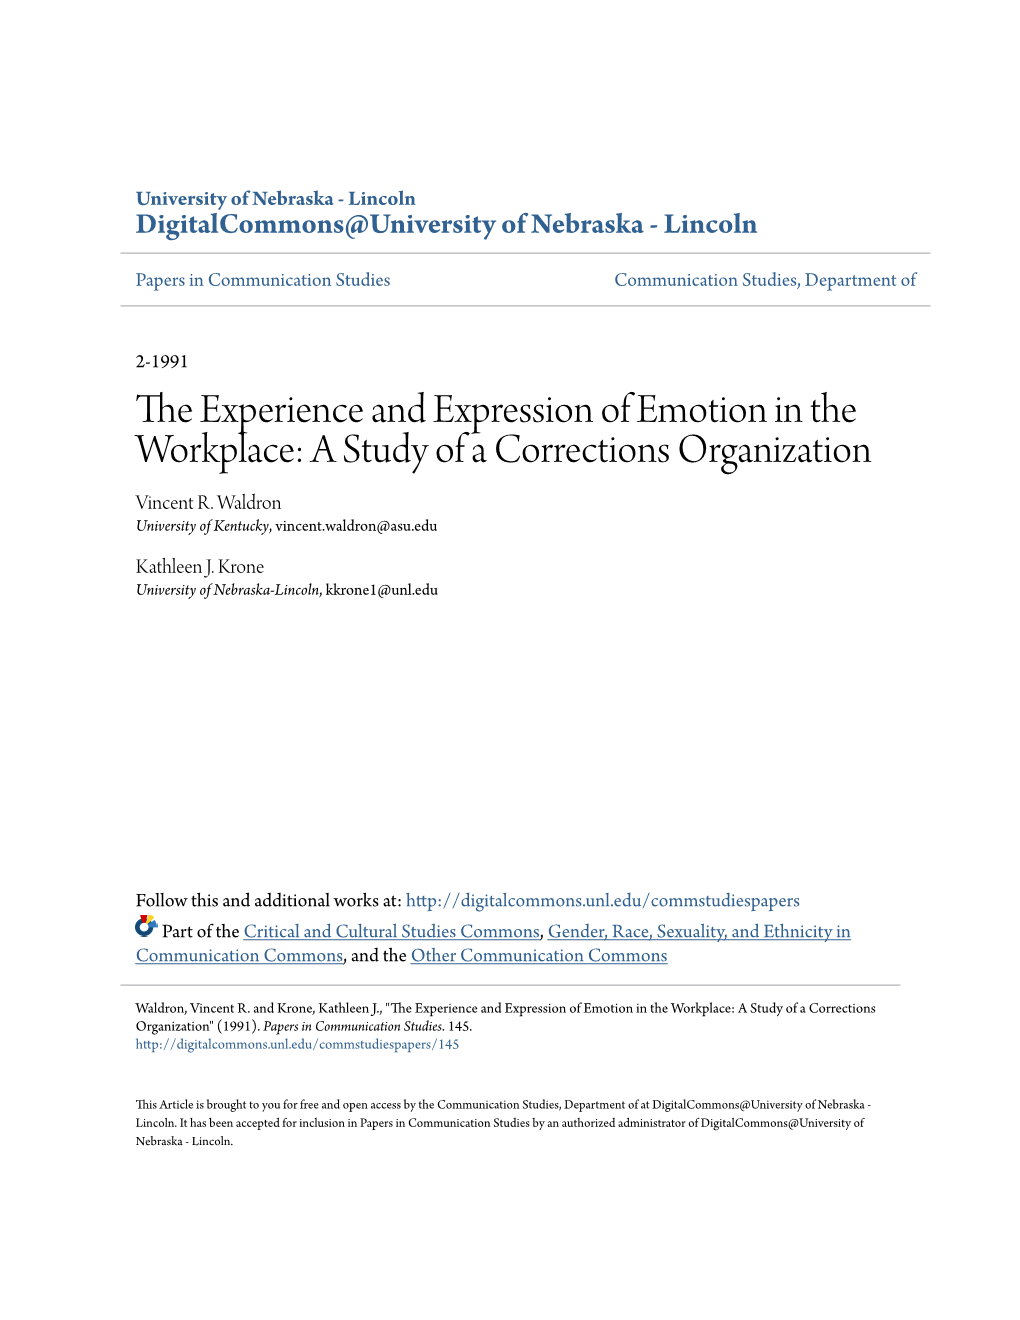 The Experience and Expression of Emotion in the Workplace: a Study of a Corrections Organization Vincent R